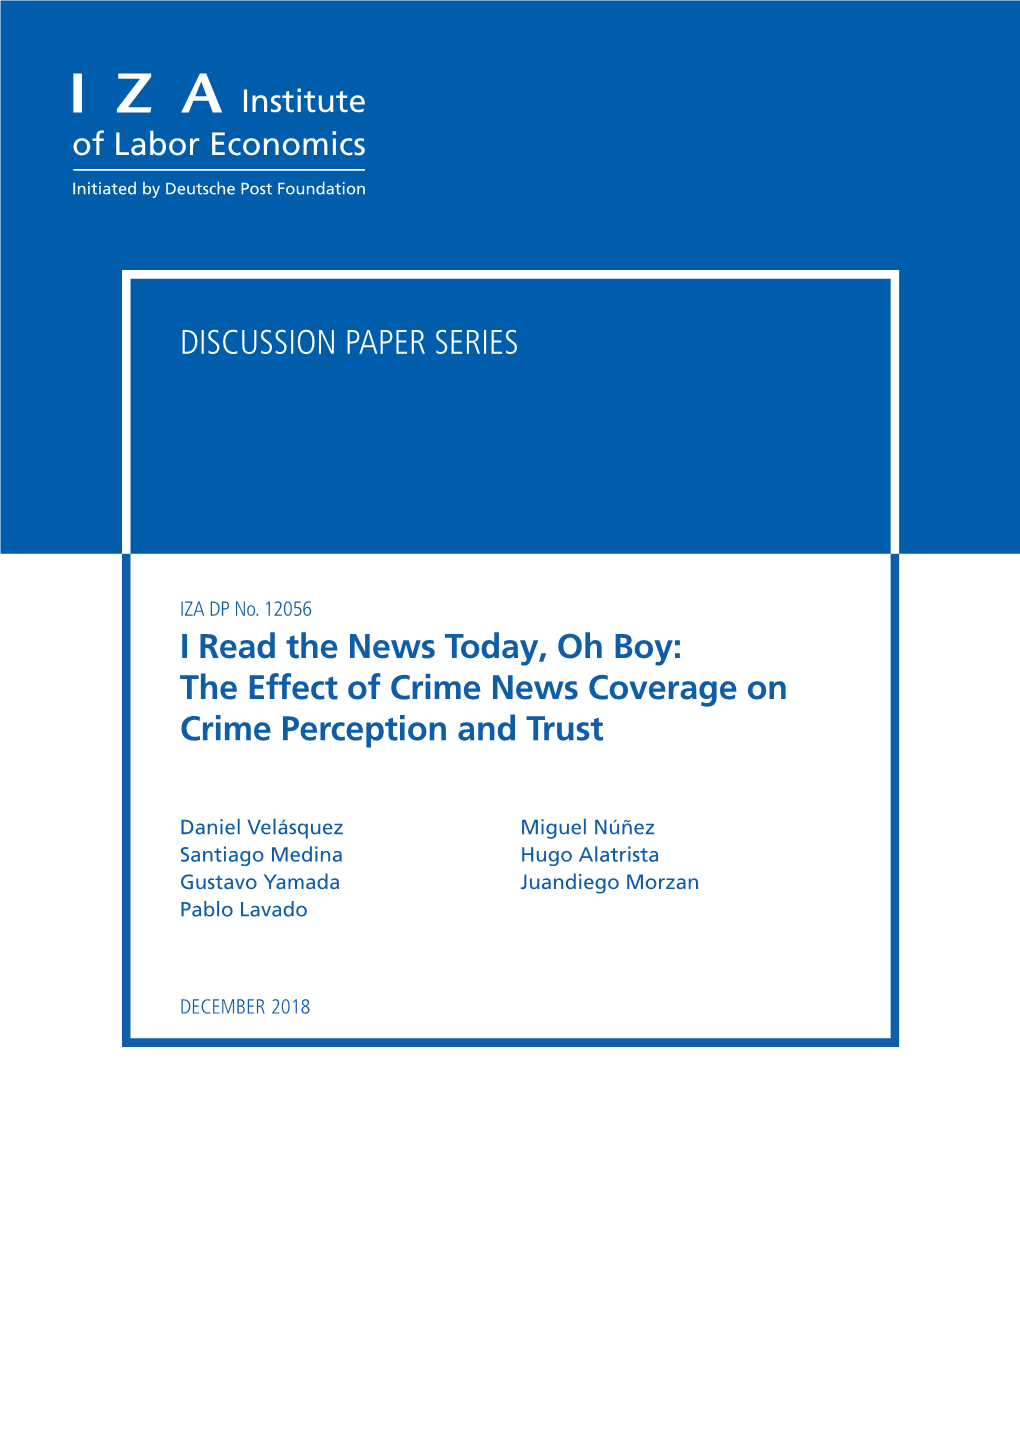 The Effect of Crime News Coverage on Crime Perception and Trust